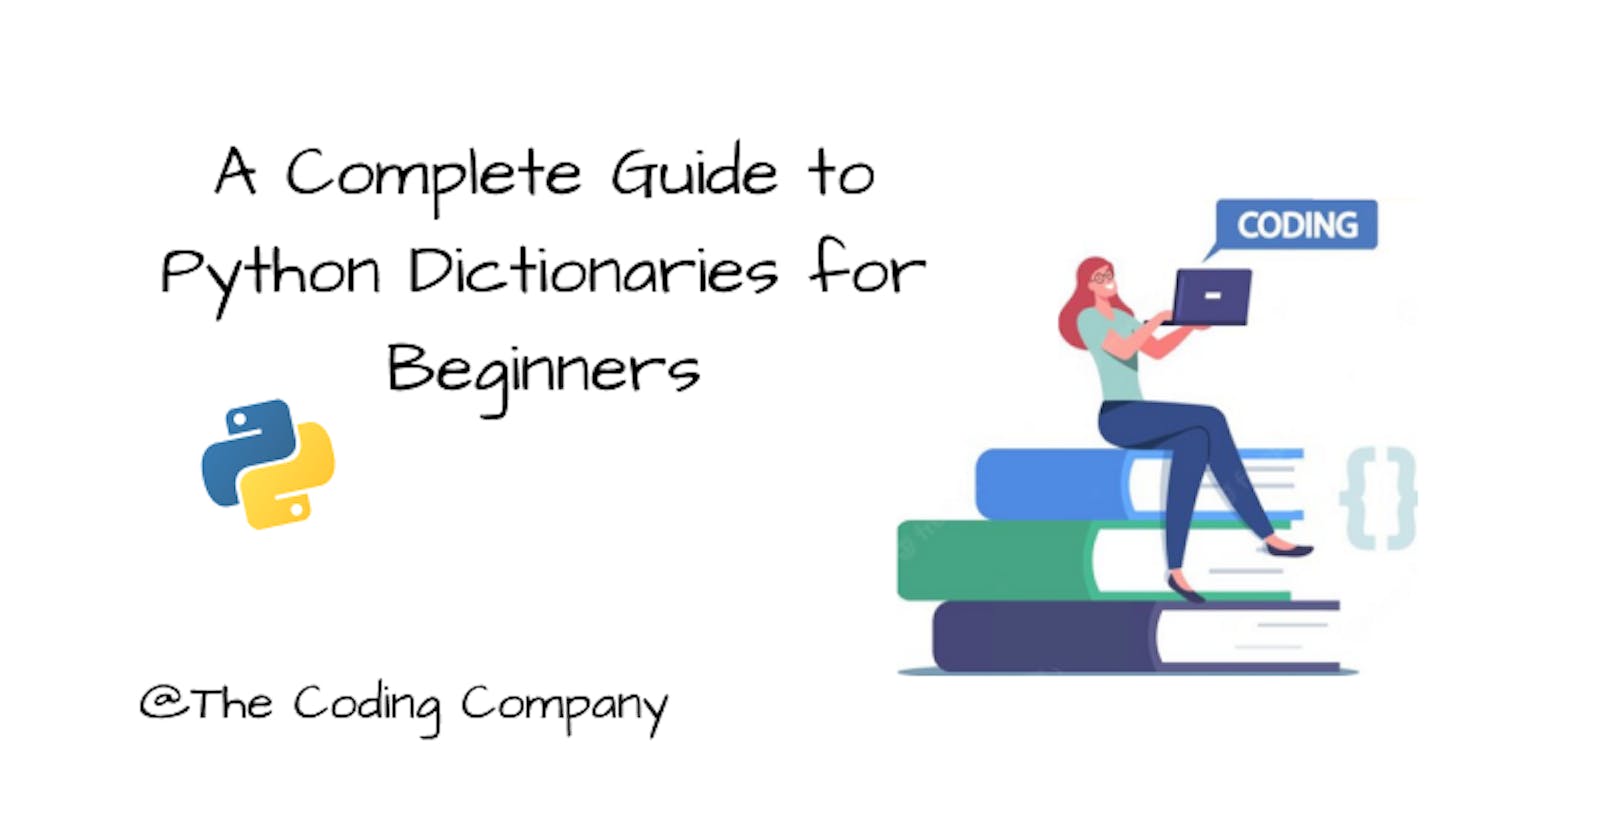 A Complete Guide to Python Dictionaries for Beginners